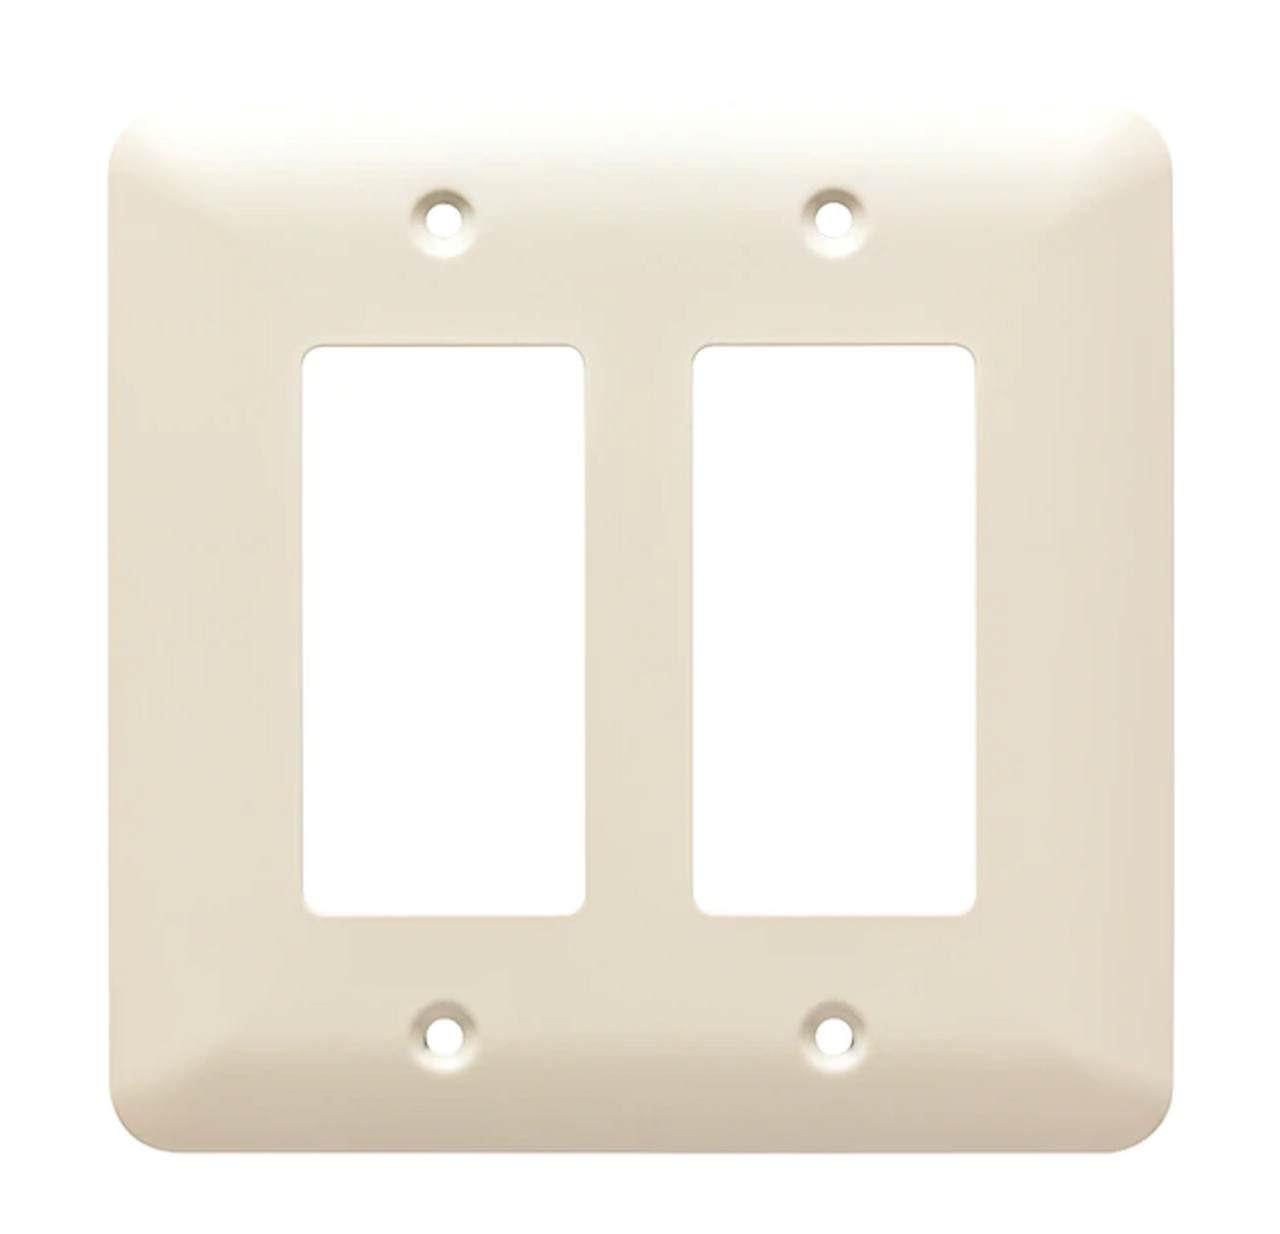 Brainerd W10252-LAL Stamped Light Almond Double GFCI Decora Cover Plate